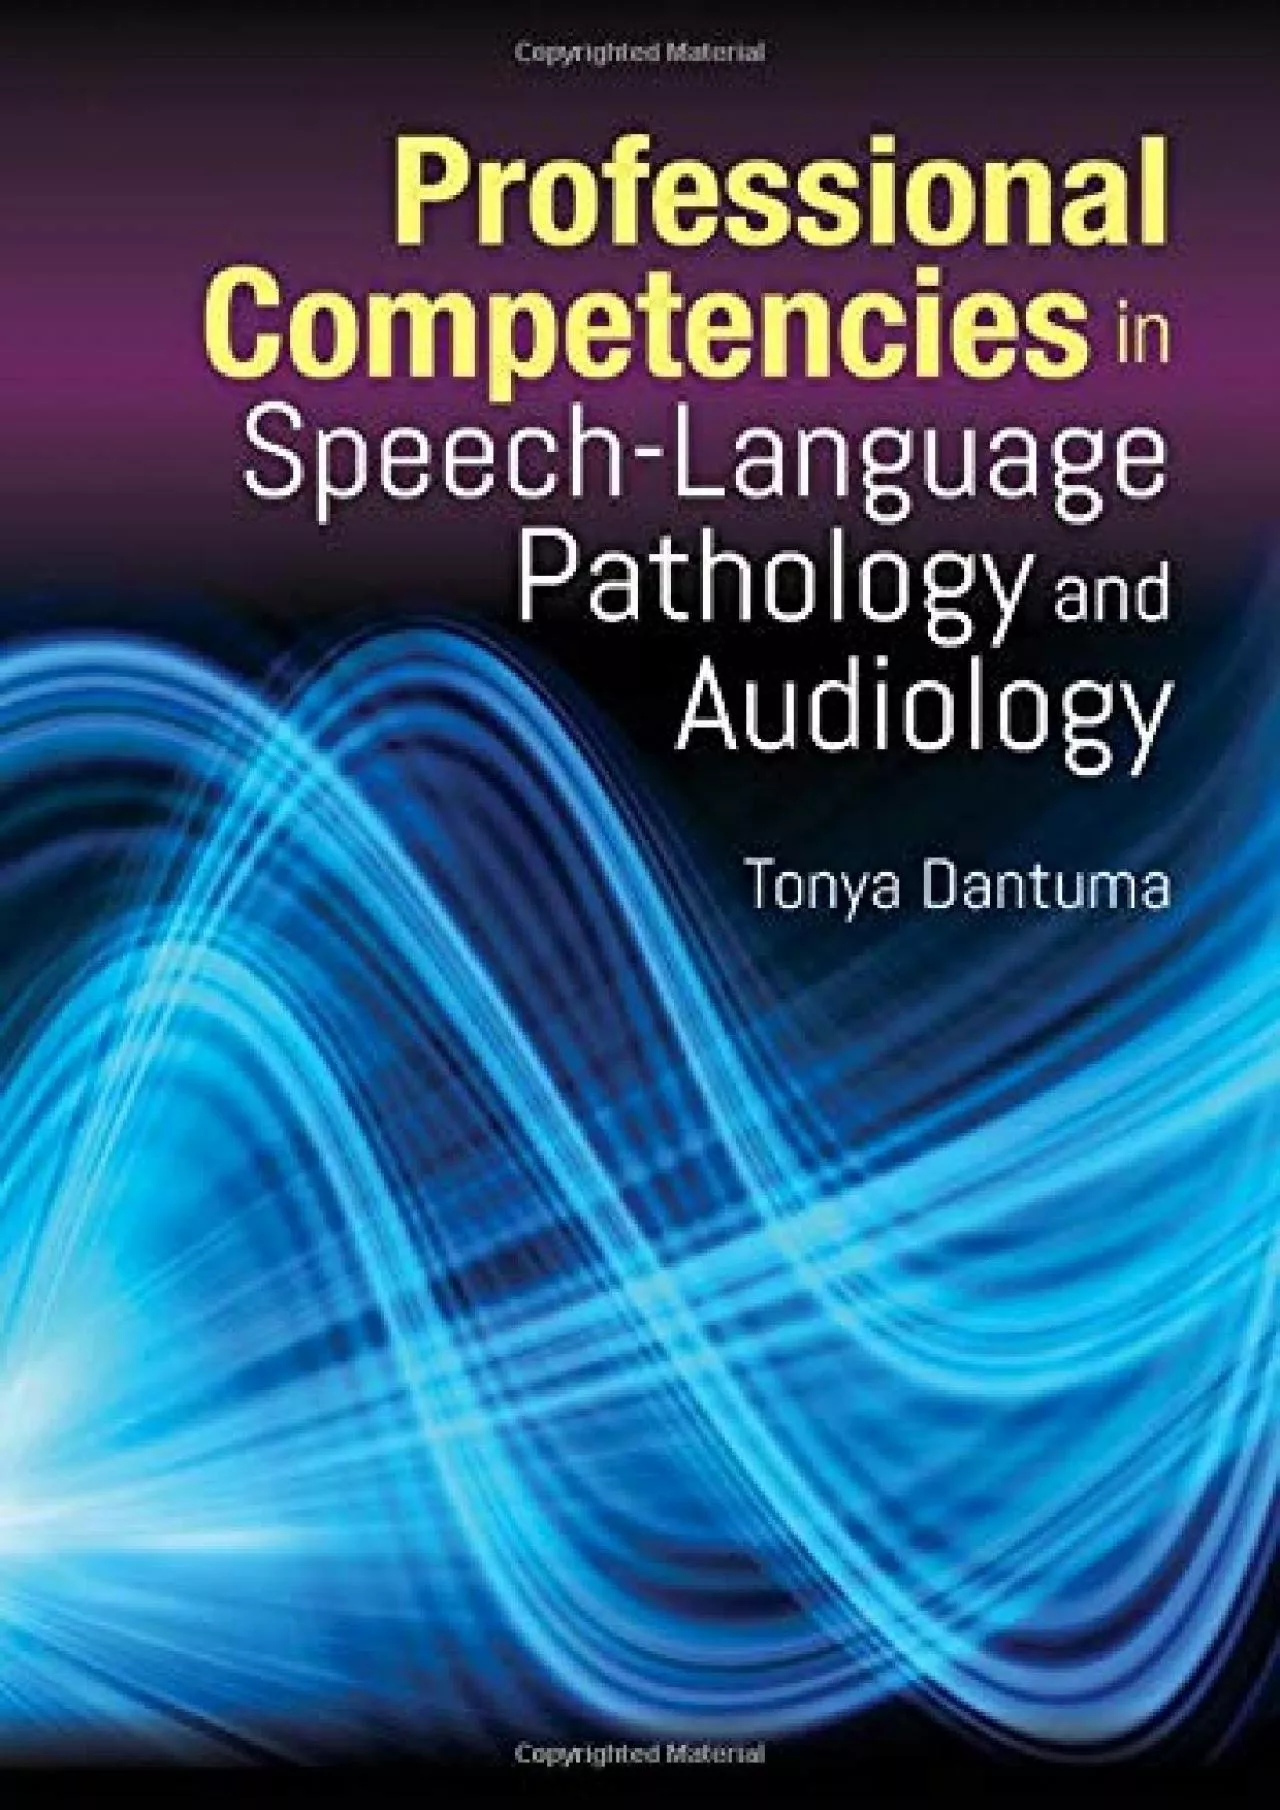 (DOWNLOAD)-Professional Competencies in Speech-Language Pathology and Audiology